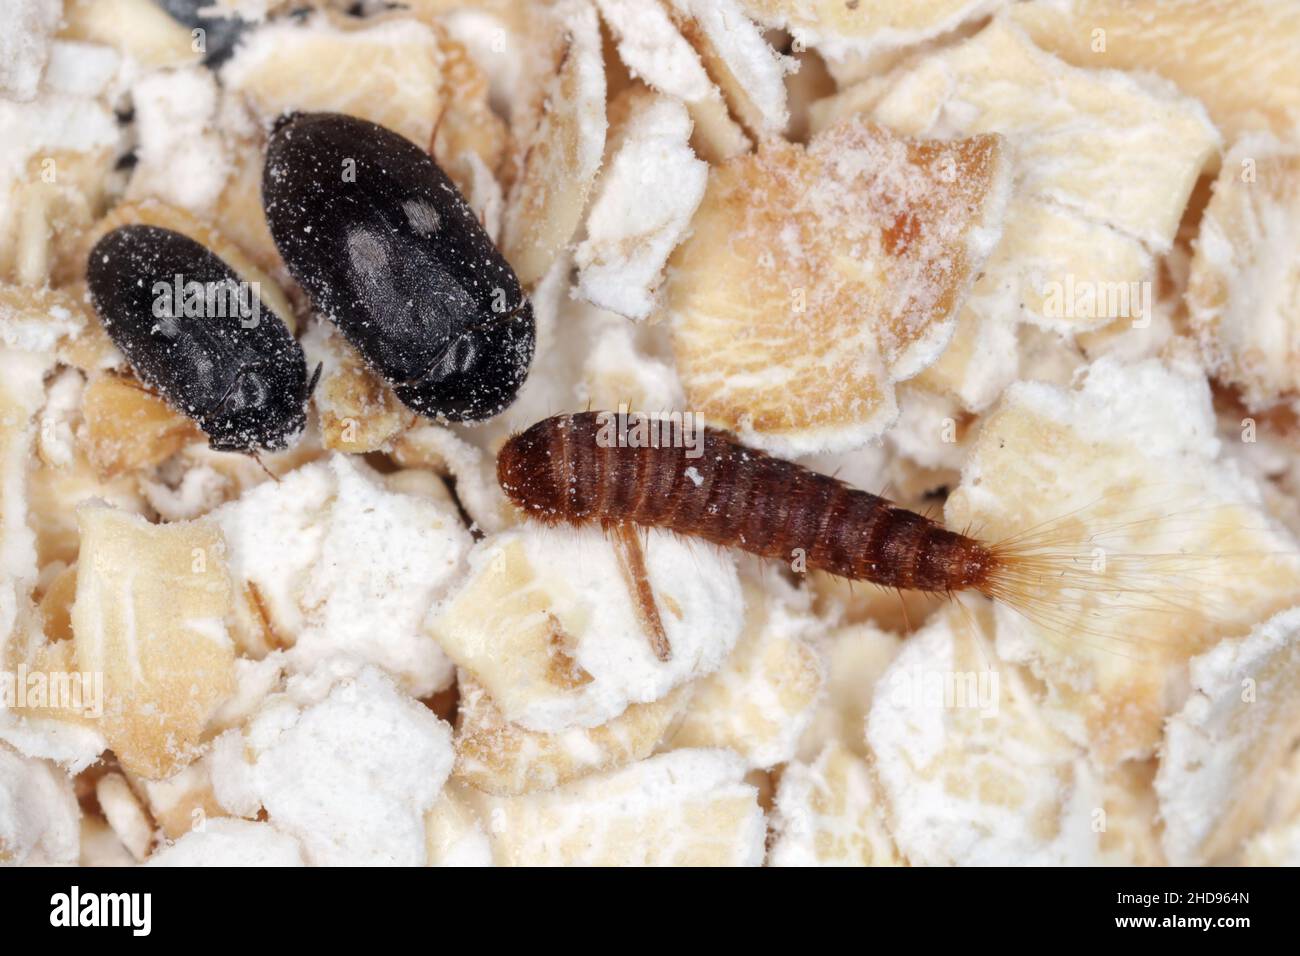 Female, male and larva of Attagenus pellio the fur beetle or carpet beetle from the family Dermestidae a skin beetles. On oat flakes. Stock Photo